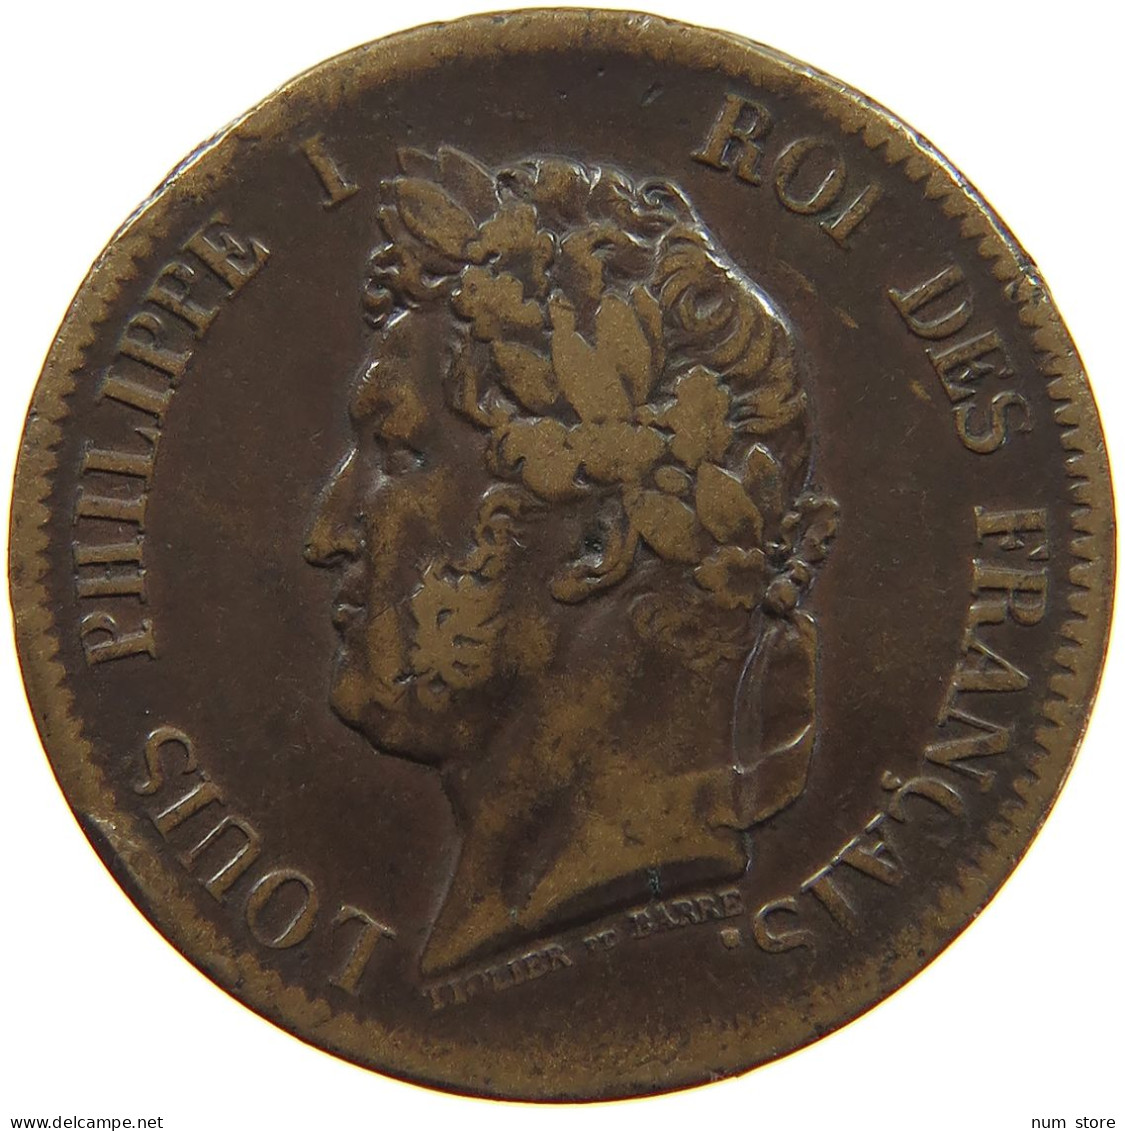 FRENCH COLONIES 5 CENTIMES 1843 A LOUIS PHILIPPE I. (1830-1848) #c061 0071 - French Colonies (1817-1844)